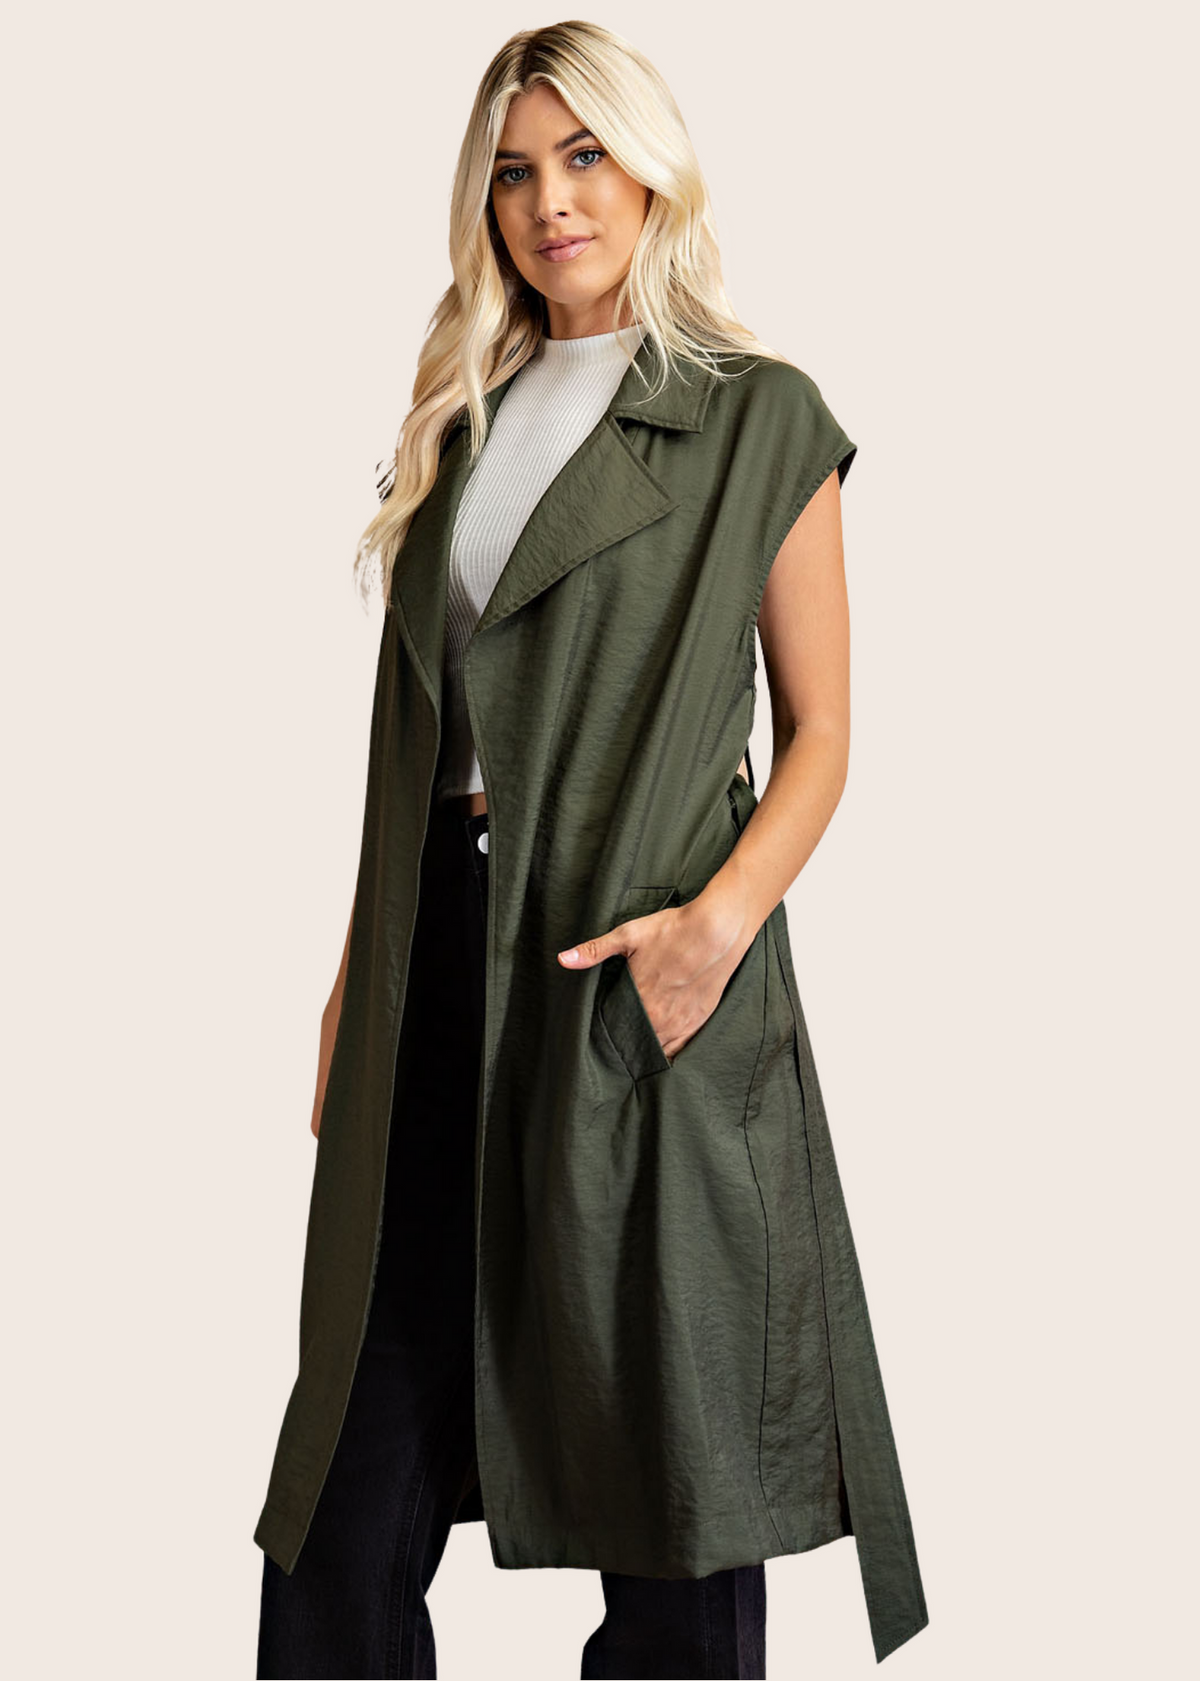 Long Double Breasted Sleeveless Olive Vest with Tie